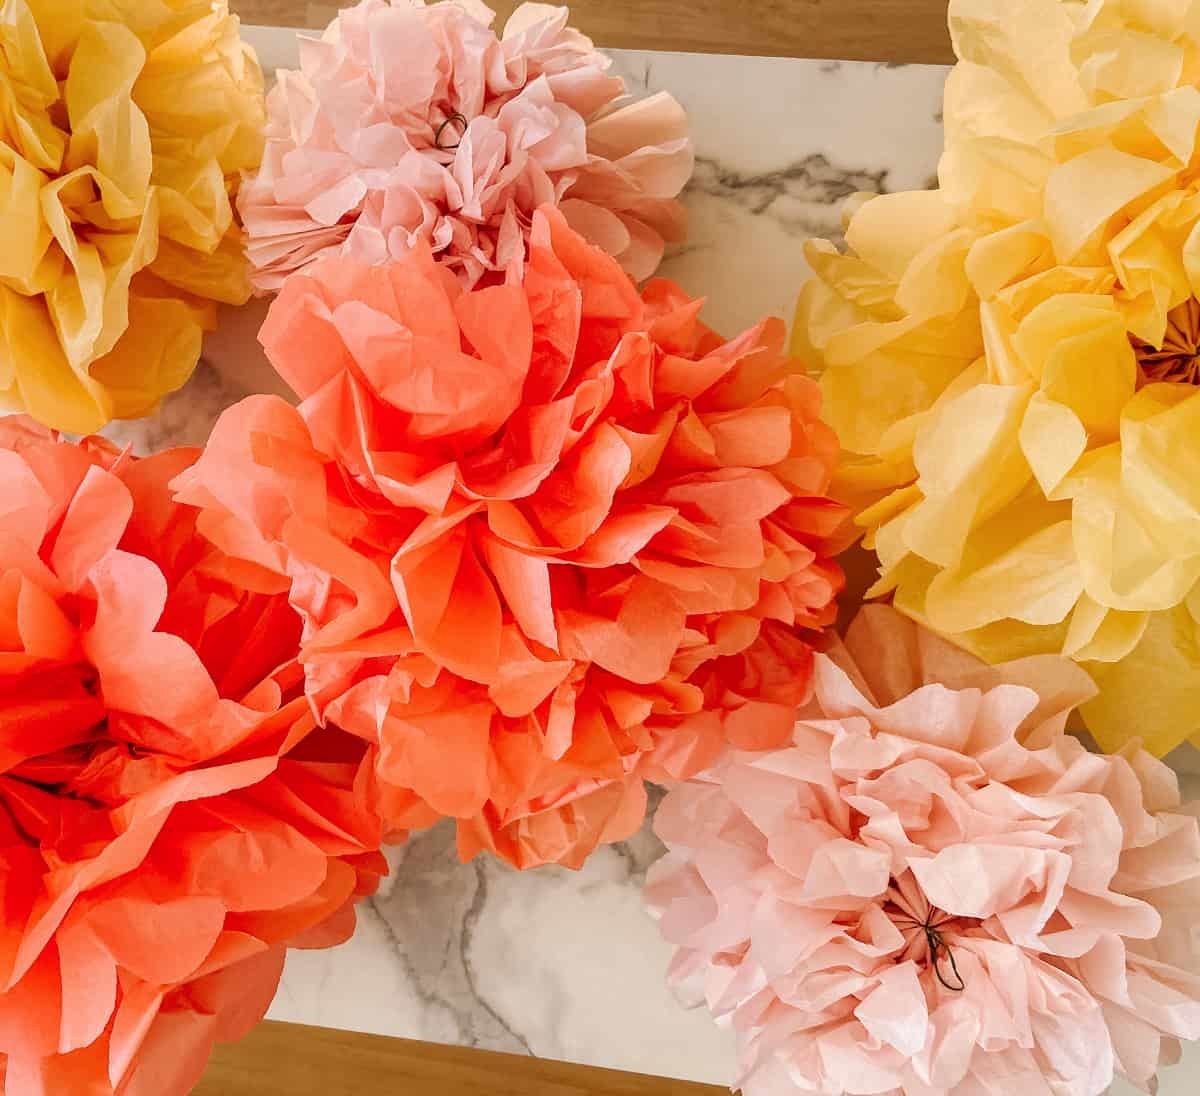 colorful pom poms made of tissue paper